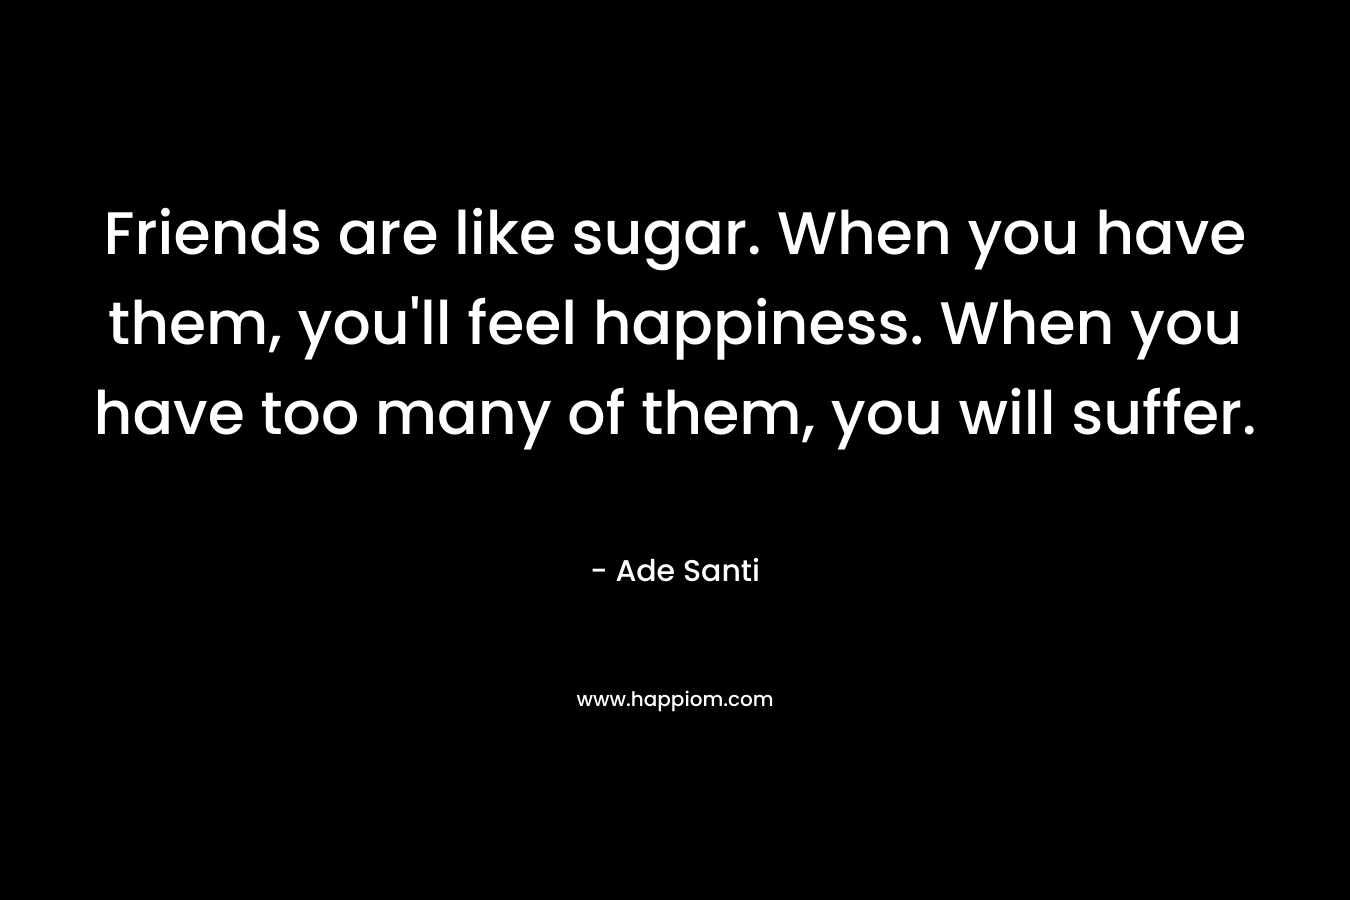 Friends are like sugar. When you have them, you’ll feel happiness. When you have too many of them, you will suffer. – Ade Santi